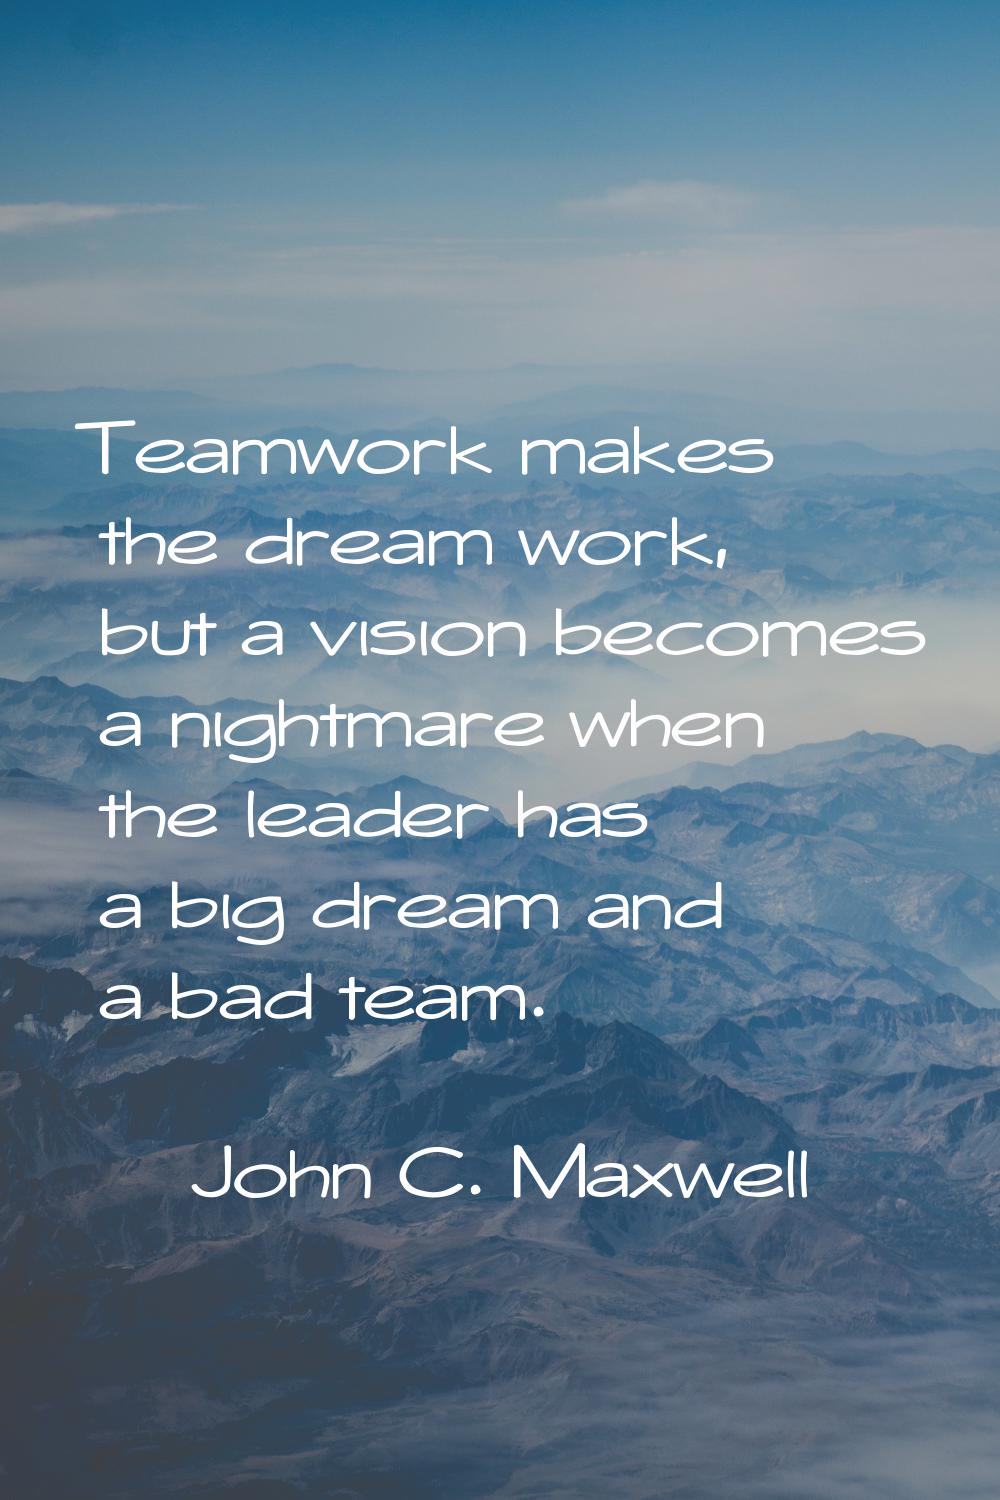 Teamwork makes the dream work, but a vision becomes a nightmare when the leader has a big dream and